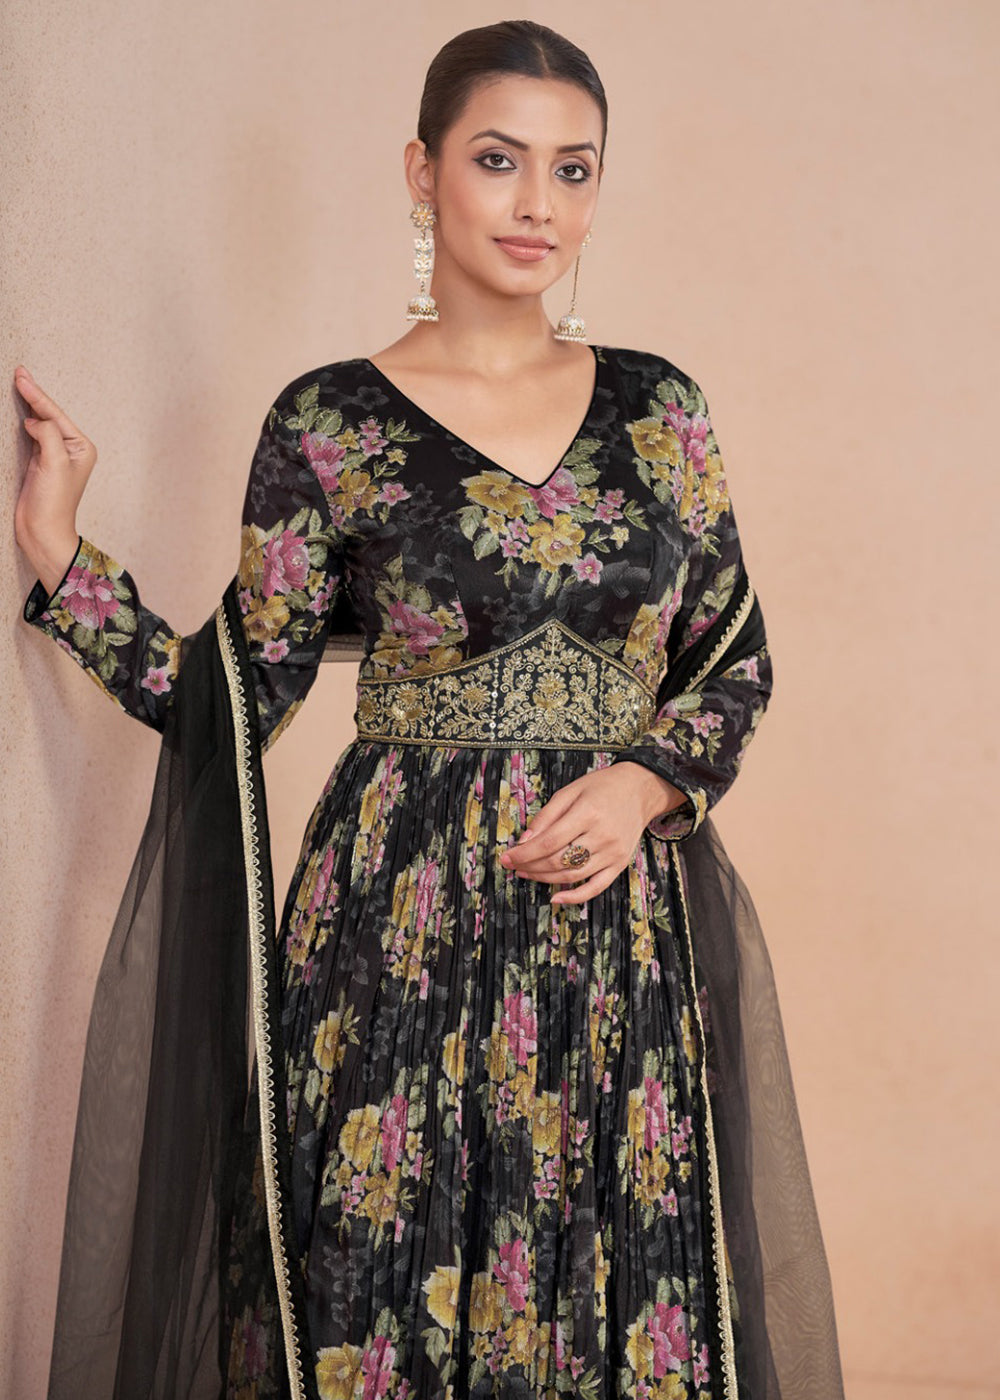 Buy Now Digital Printed Black Embroidered Wedding Anarkali Gown Online in USA, UK, Australia, New Zealand, Canada & Worldwide at Empress Clothing. 